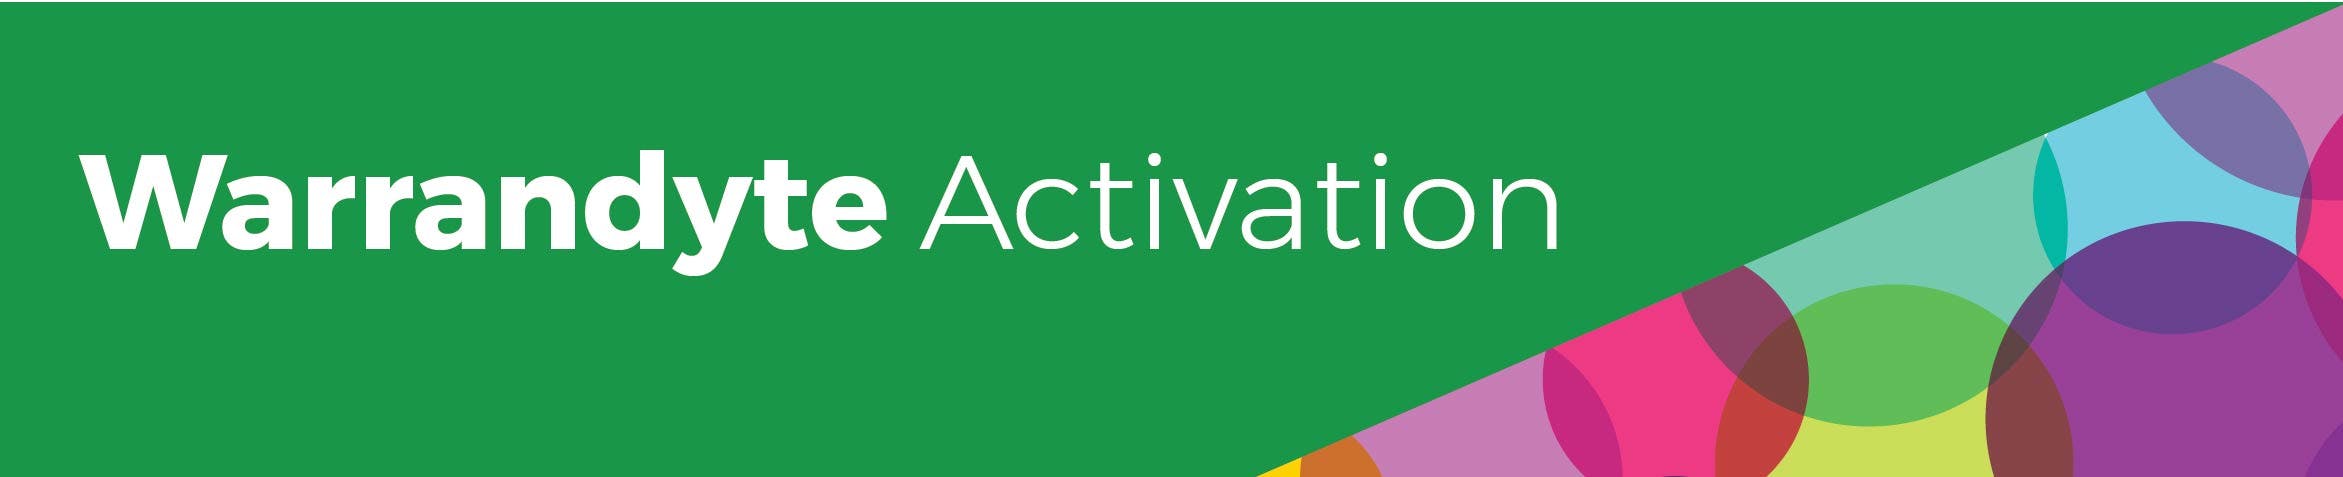 Warrandyte Activation banner with green background and colourful circles